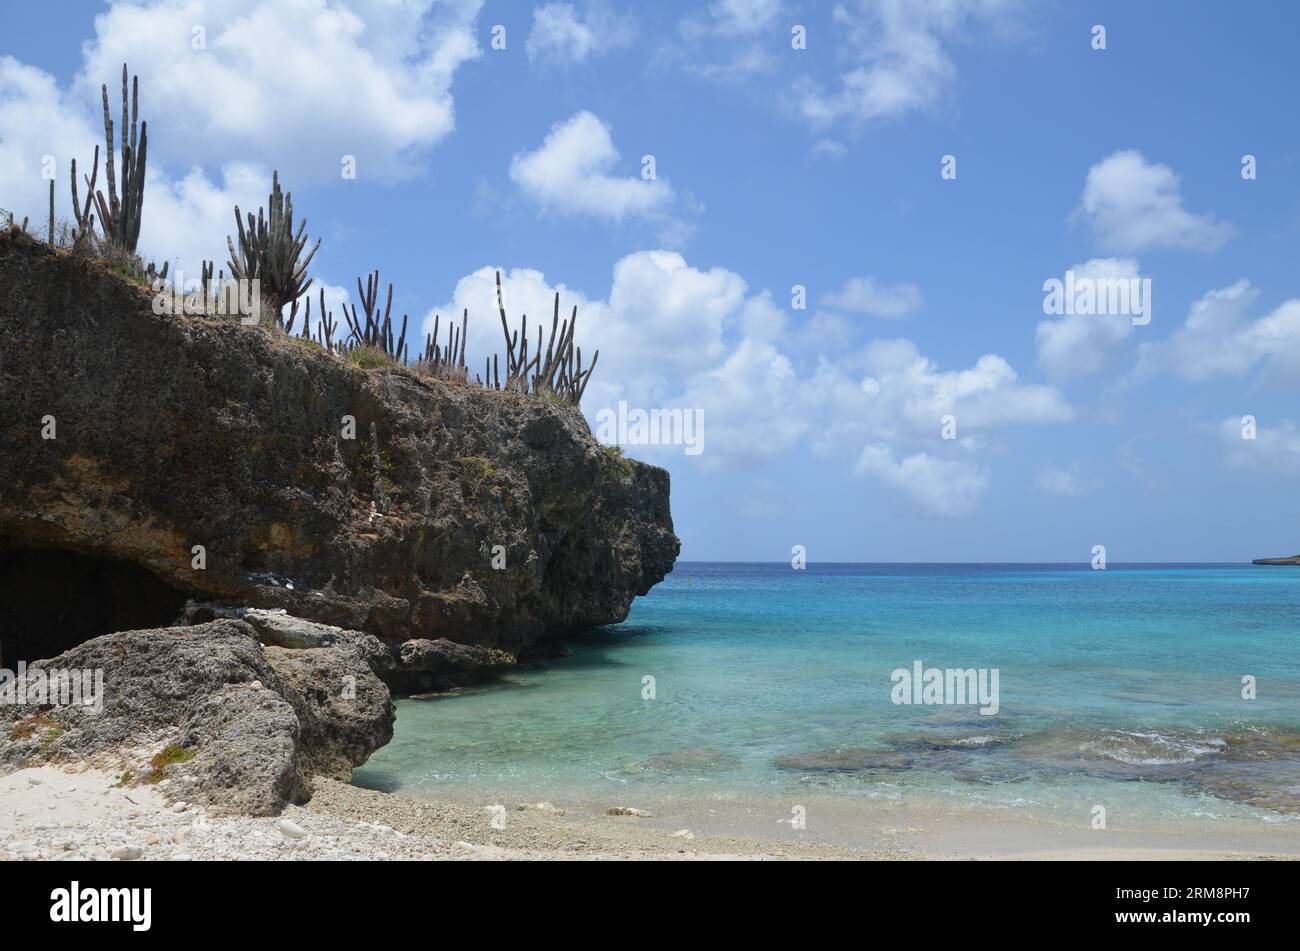 rock with plants at the white and sandy carribean beach with turquoise water Stock Photo